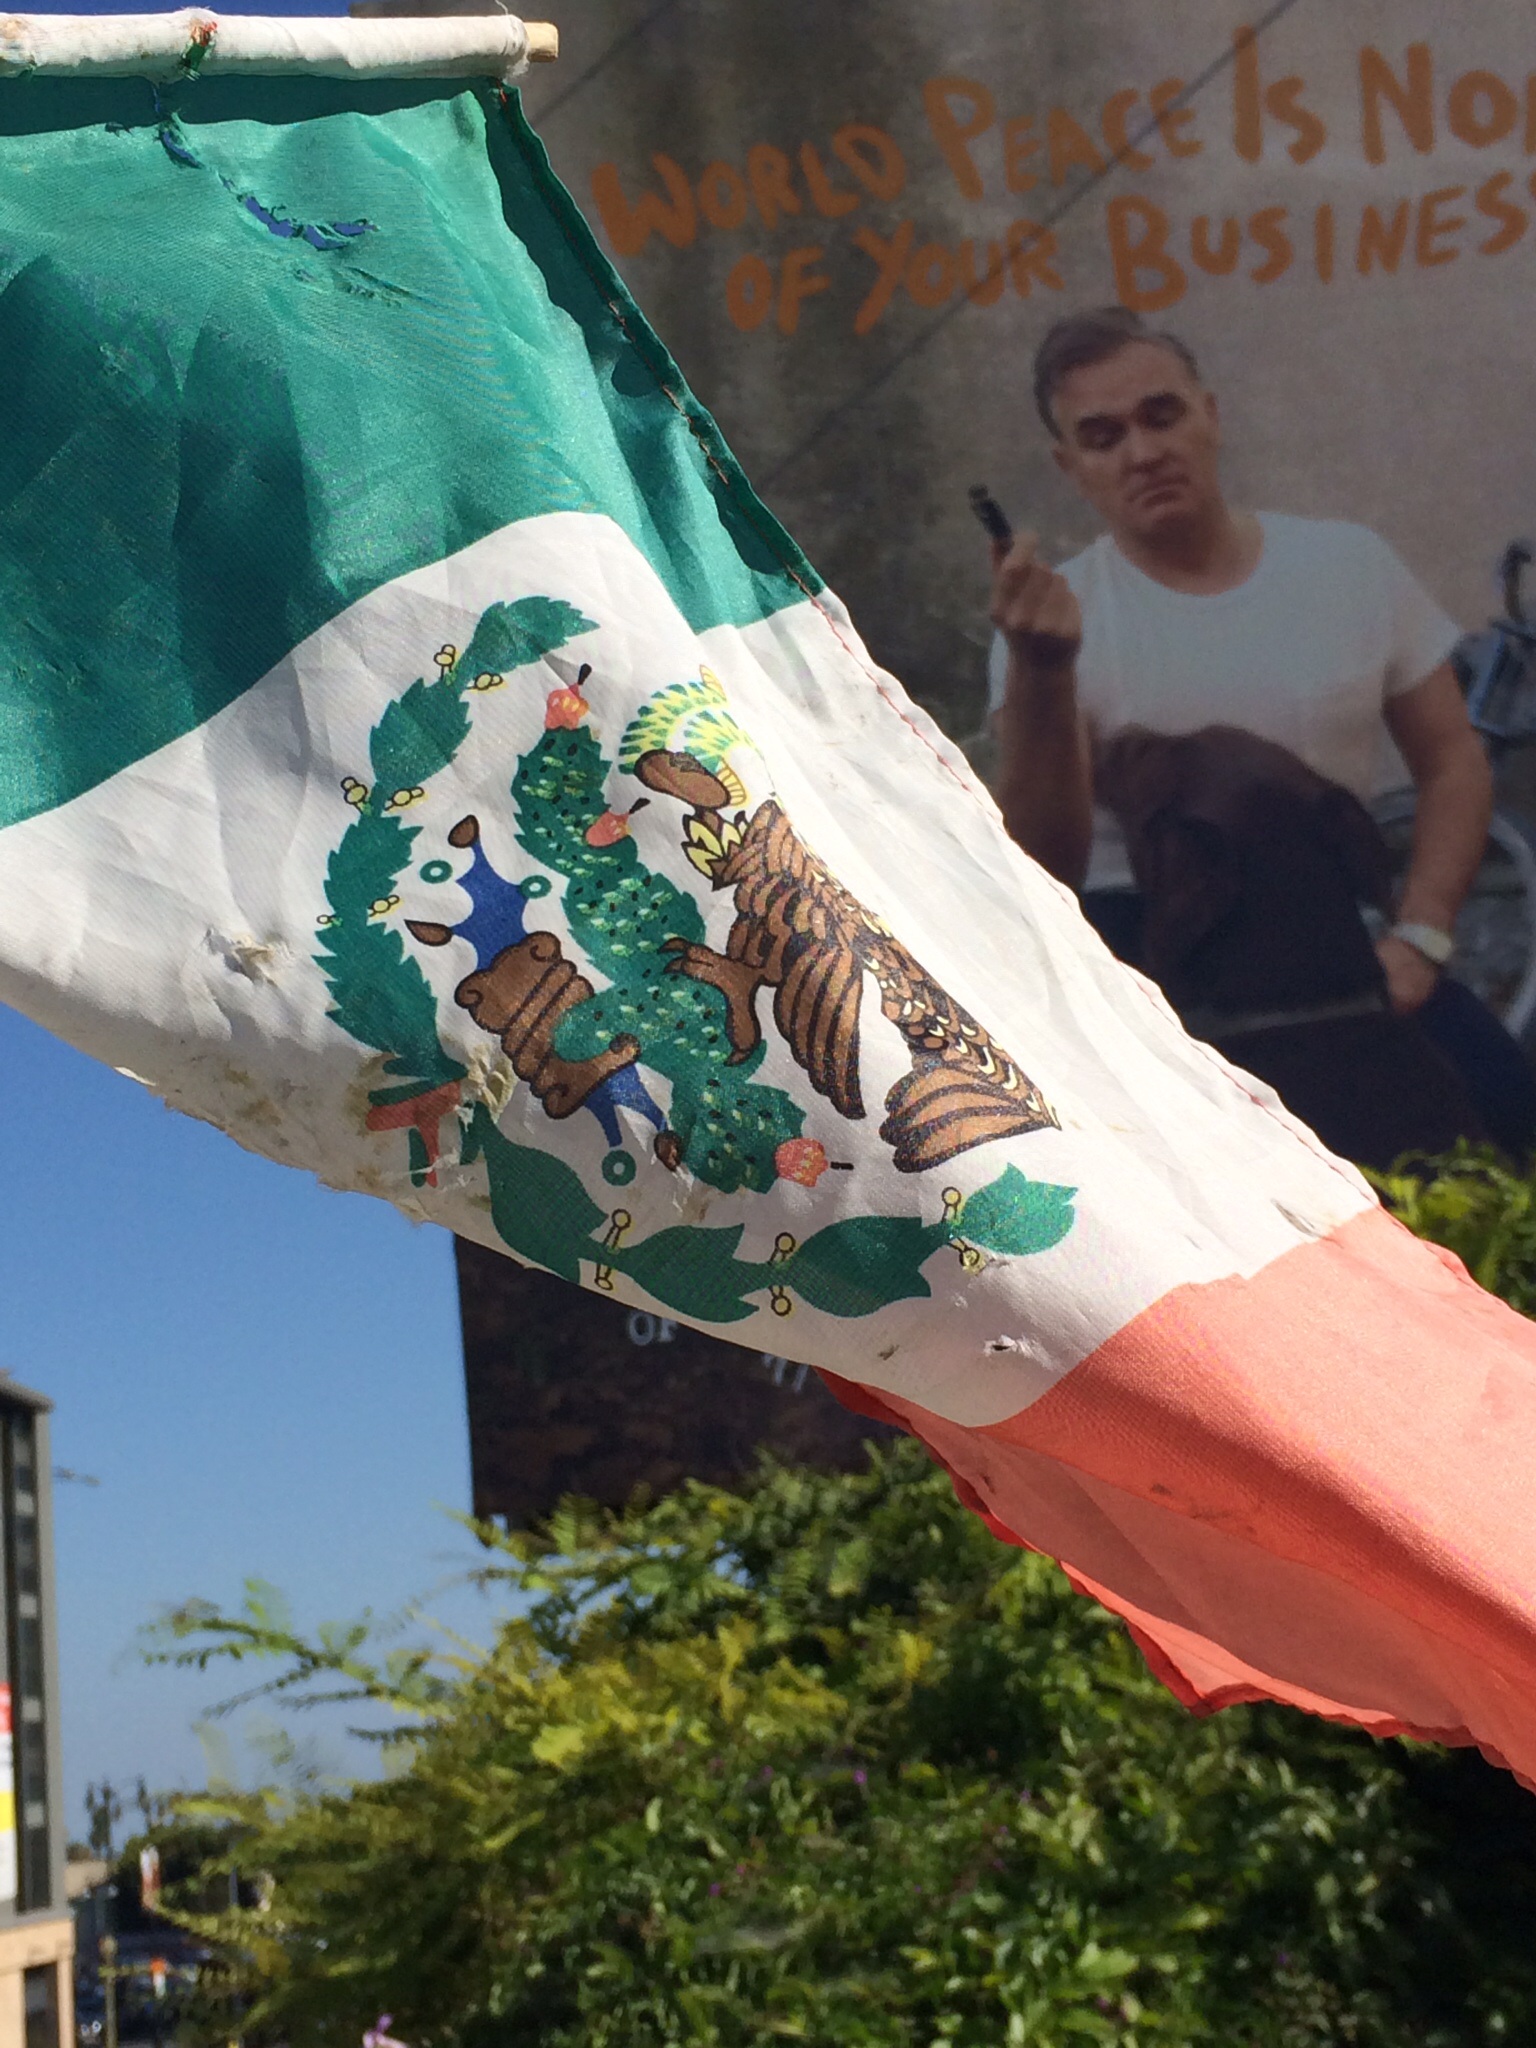 WPINOYB Billboard and the flag of MEXICO. MOZ ANGELES is where you can find